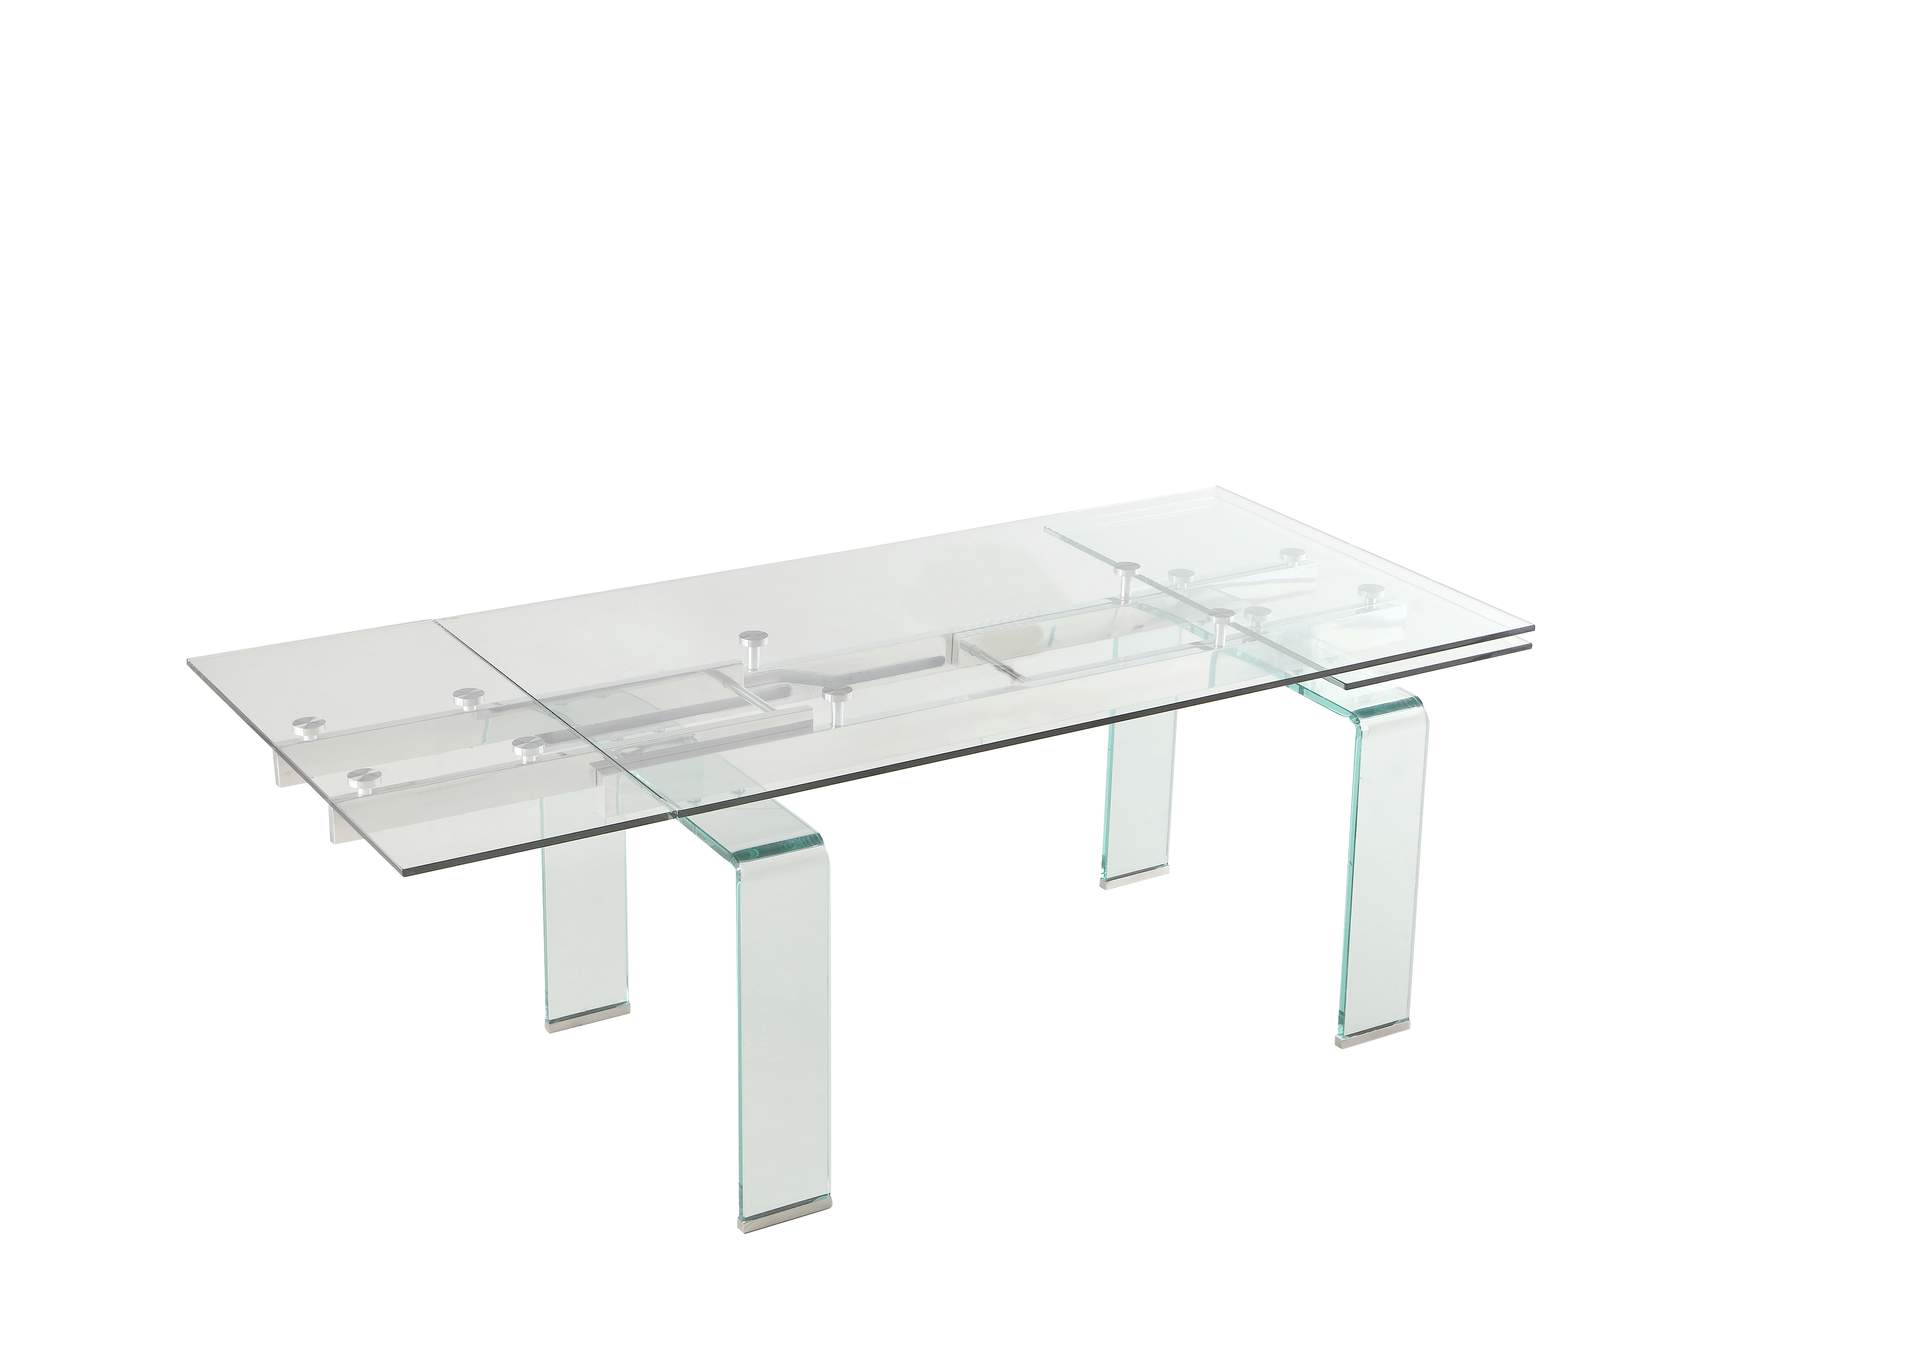 Millie Clear Extendable Glass Table,Chintaly Imports